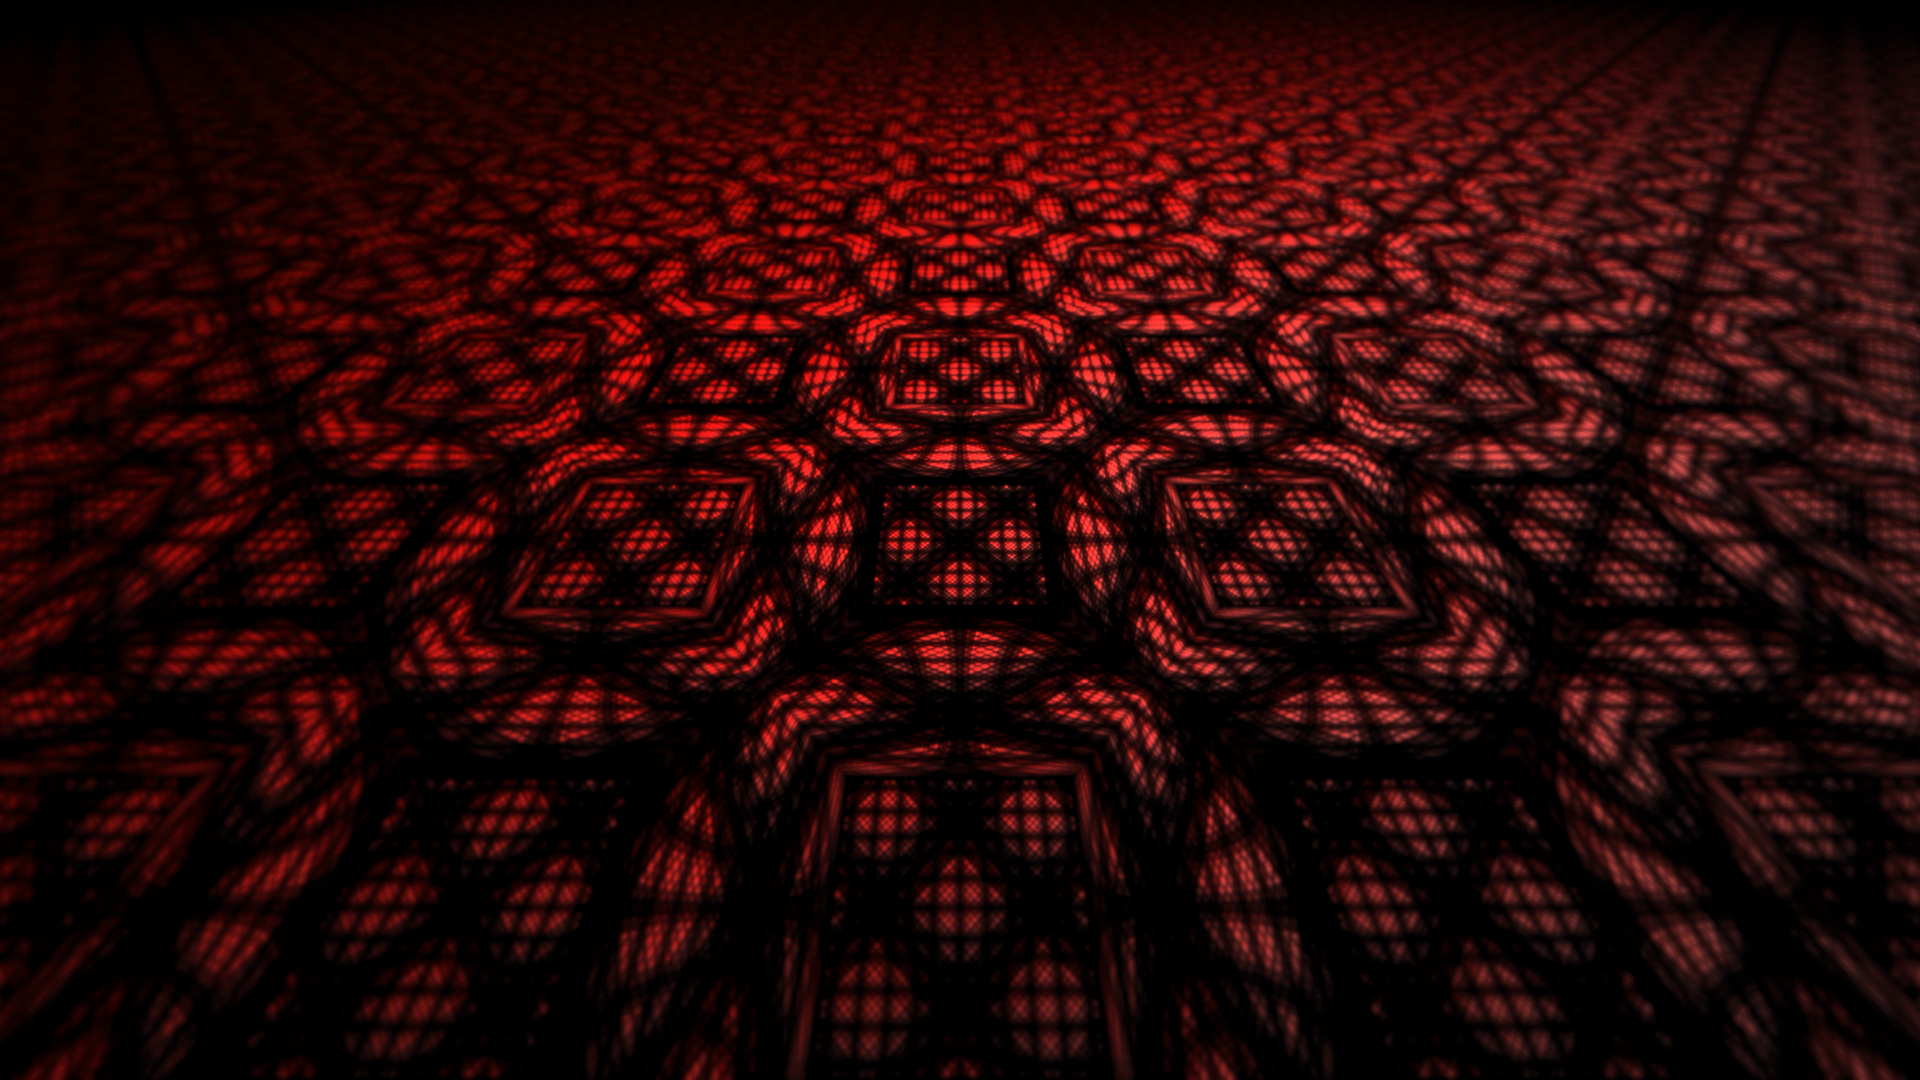 Abstract Red 4k Ultra HD Wallpaper by Nuyube